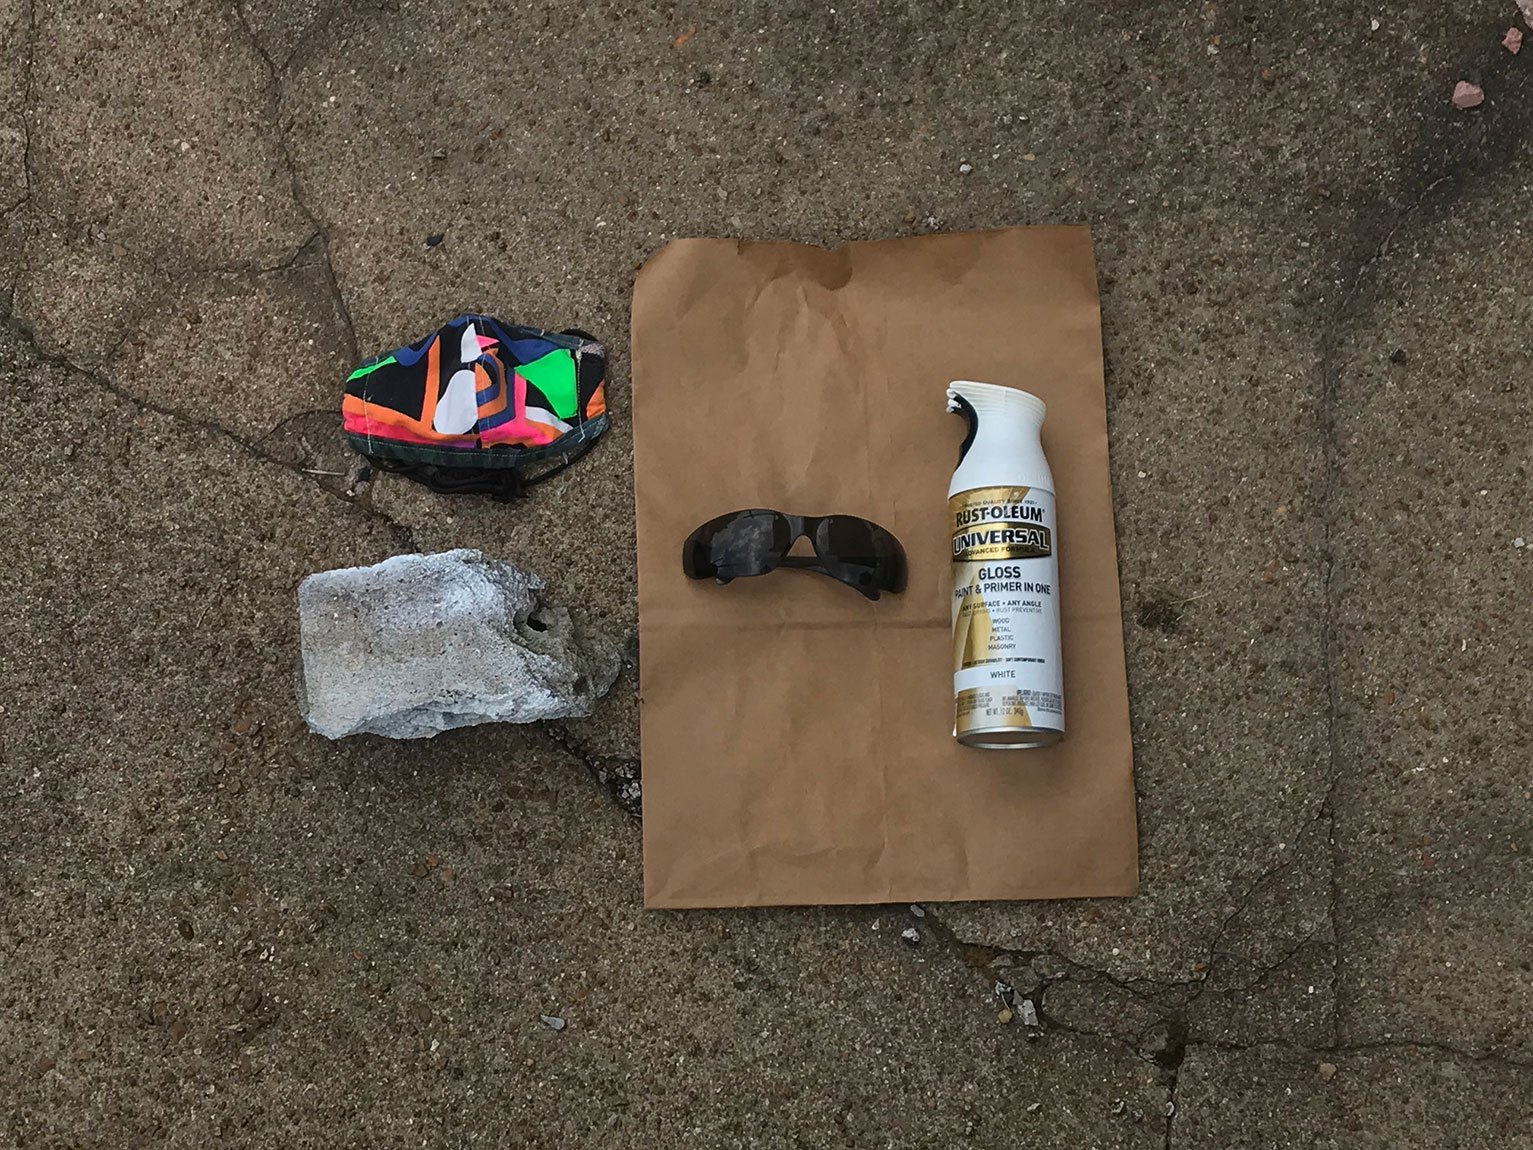 An aerial view of supplies on a pavement. A pair of glasses and a spray can of white glossy paint on a brown piece of paper and a colorful face mask and a rock beside it.